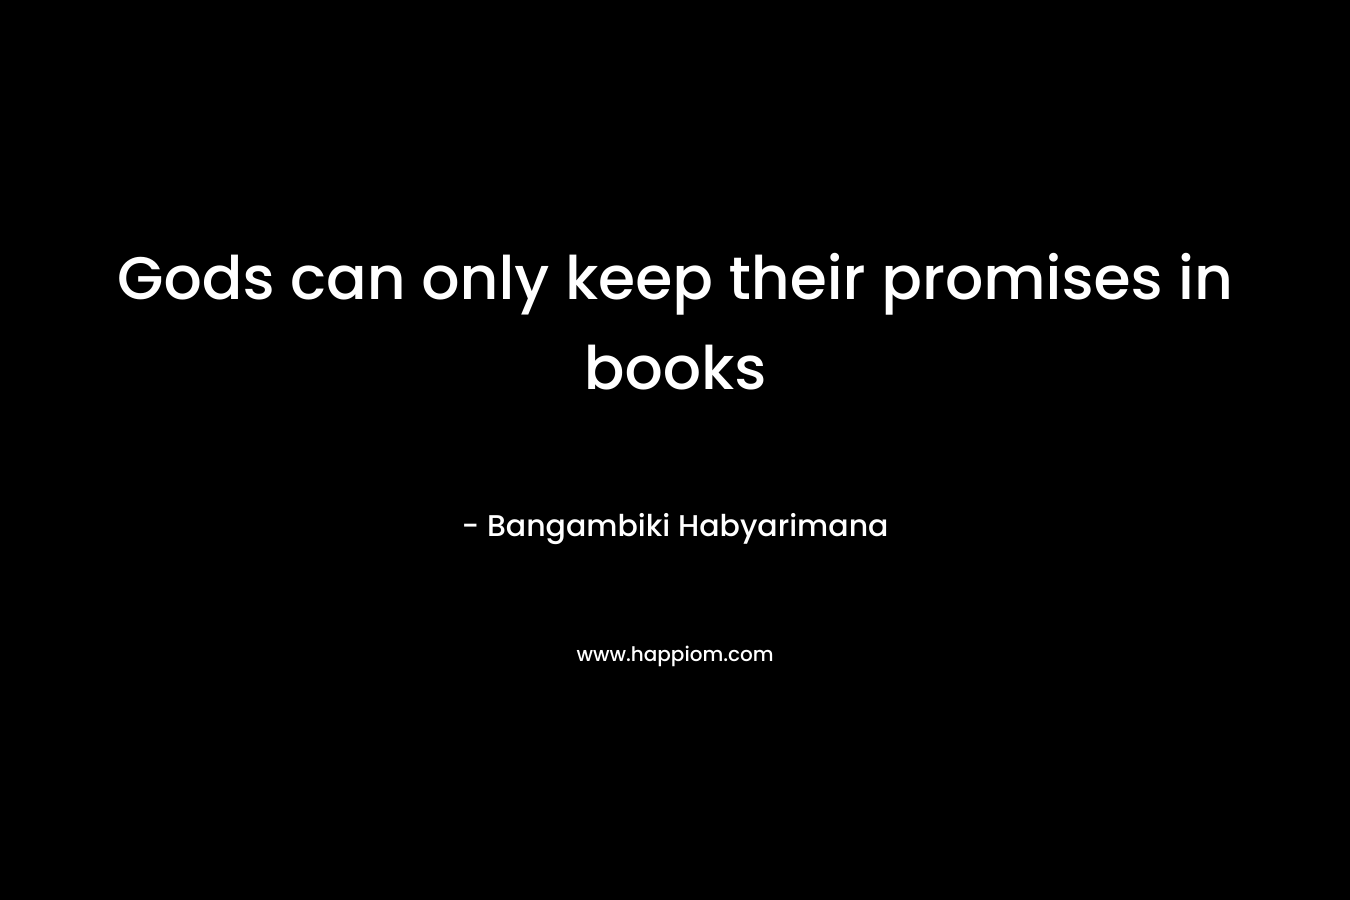 Gods can only keep their promises in books